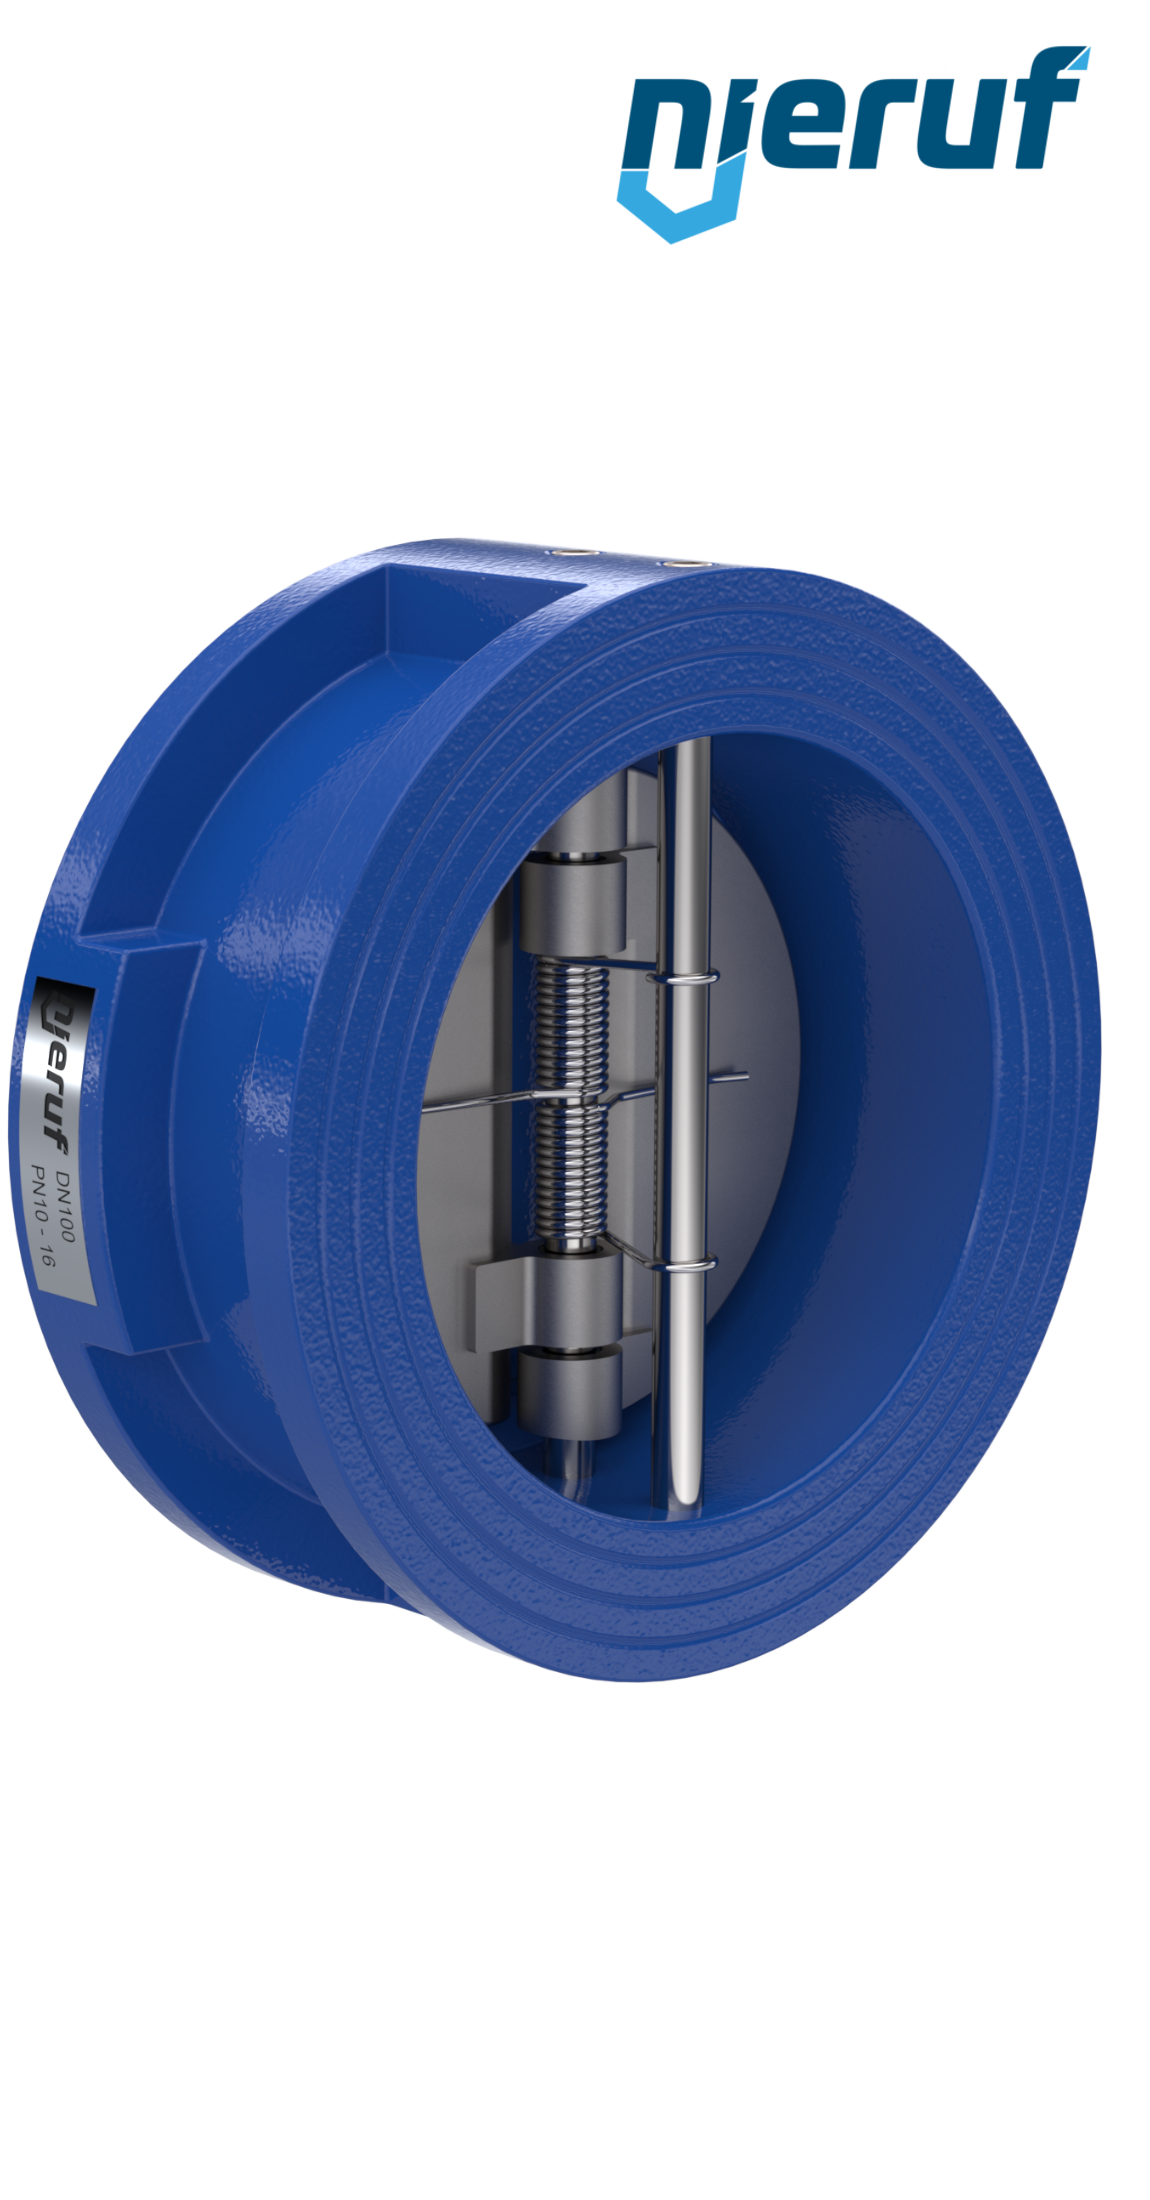 dual plate check valve DN100 DR01 GGG40 epoxyd plated blue 180µm EPDM